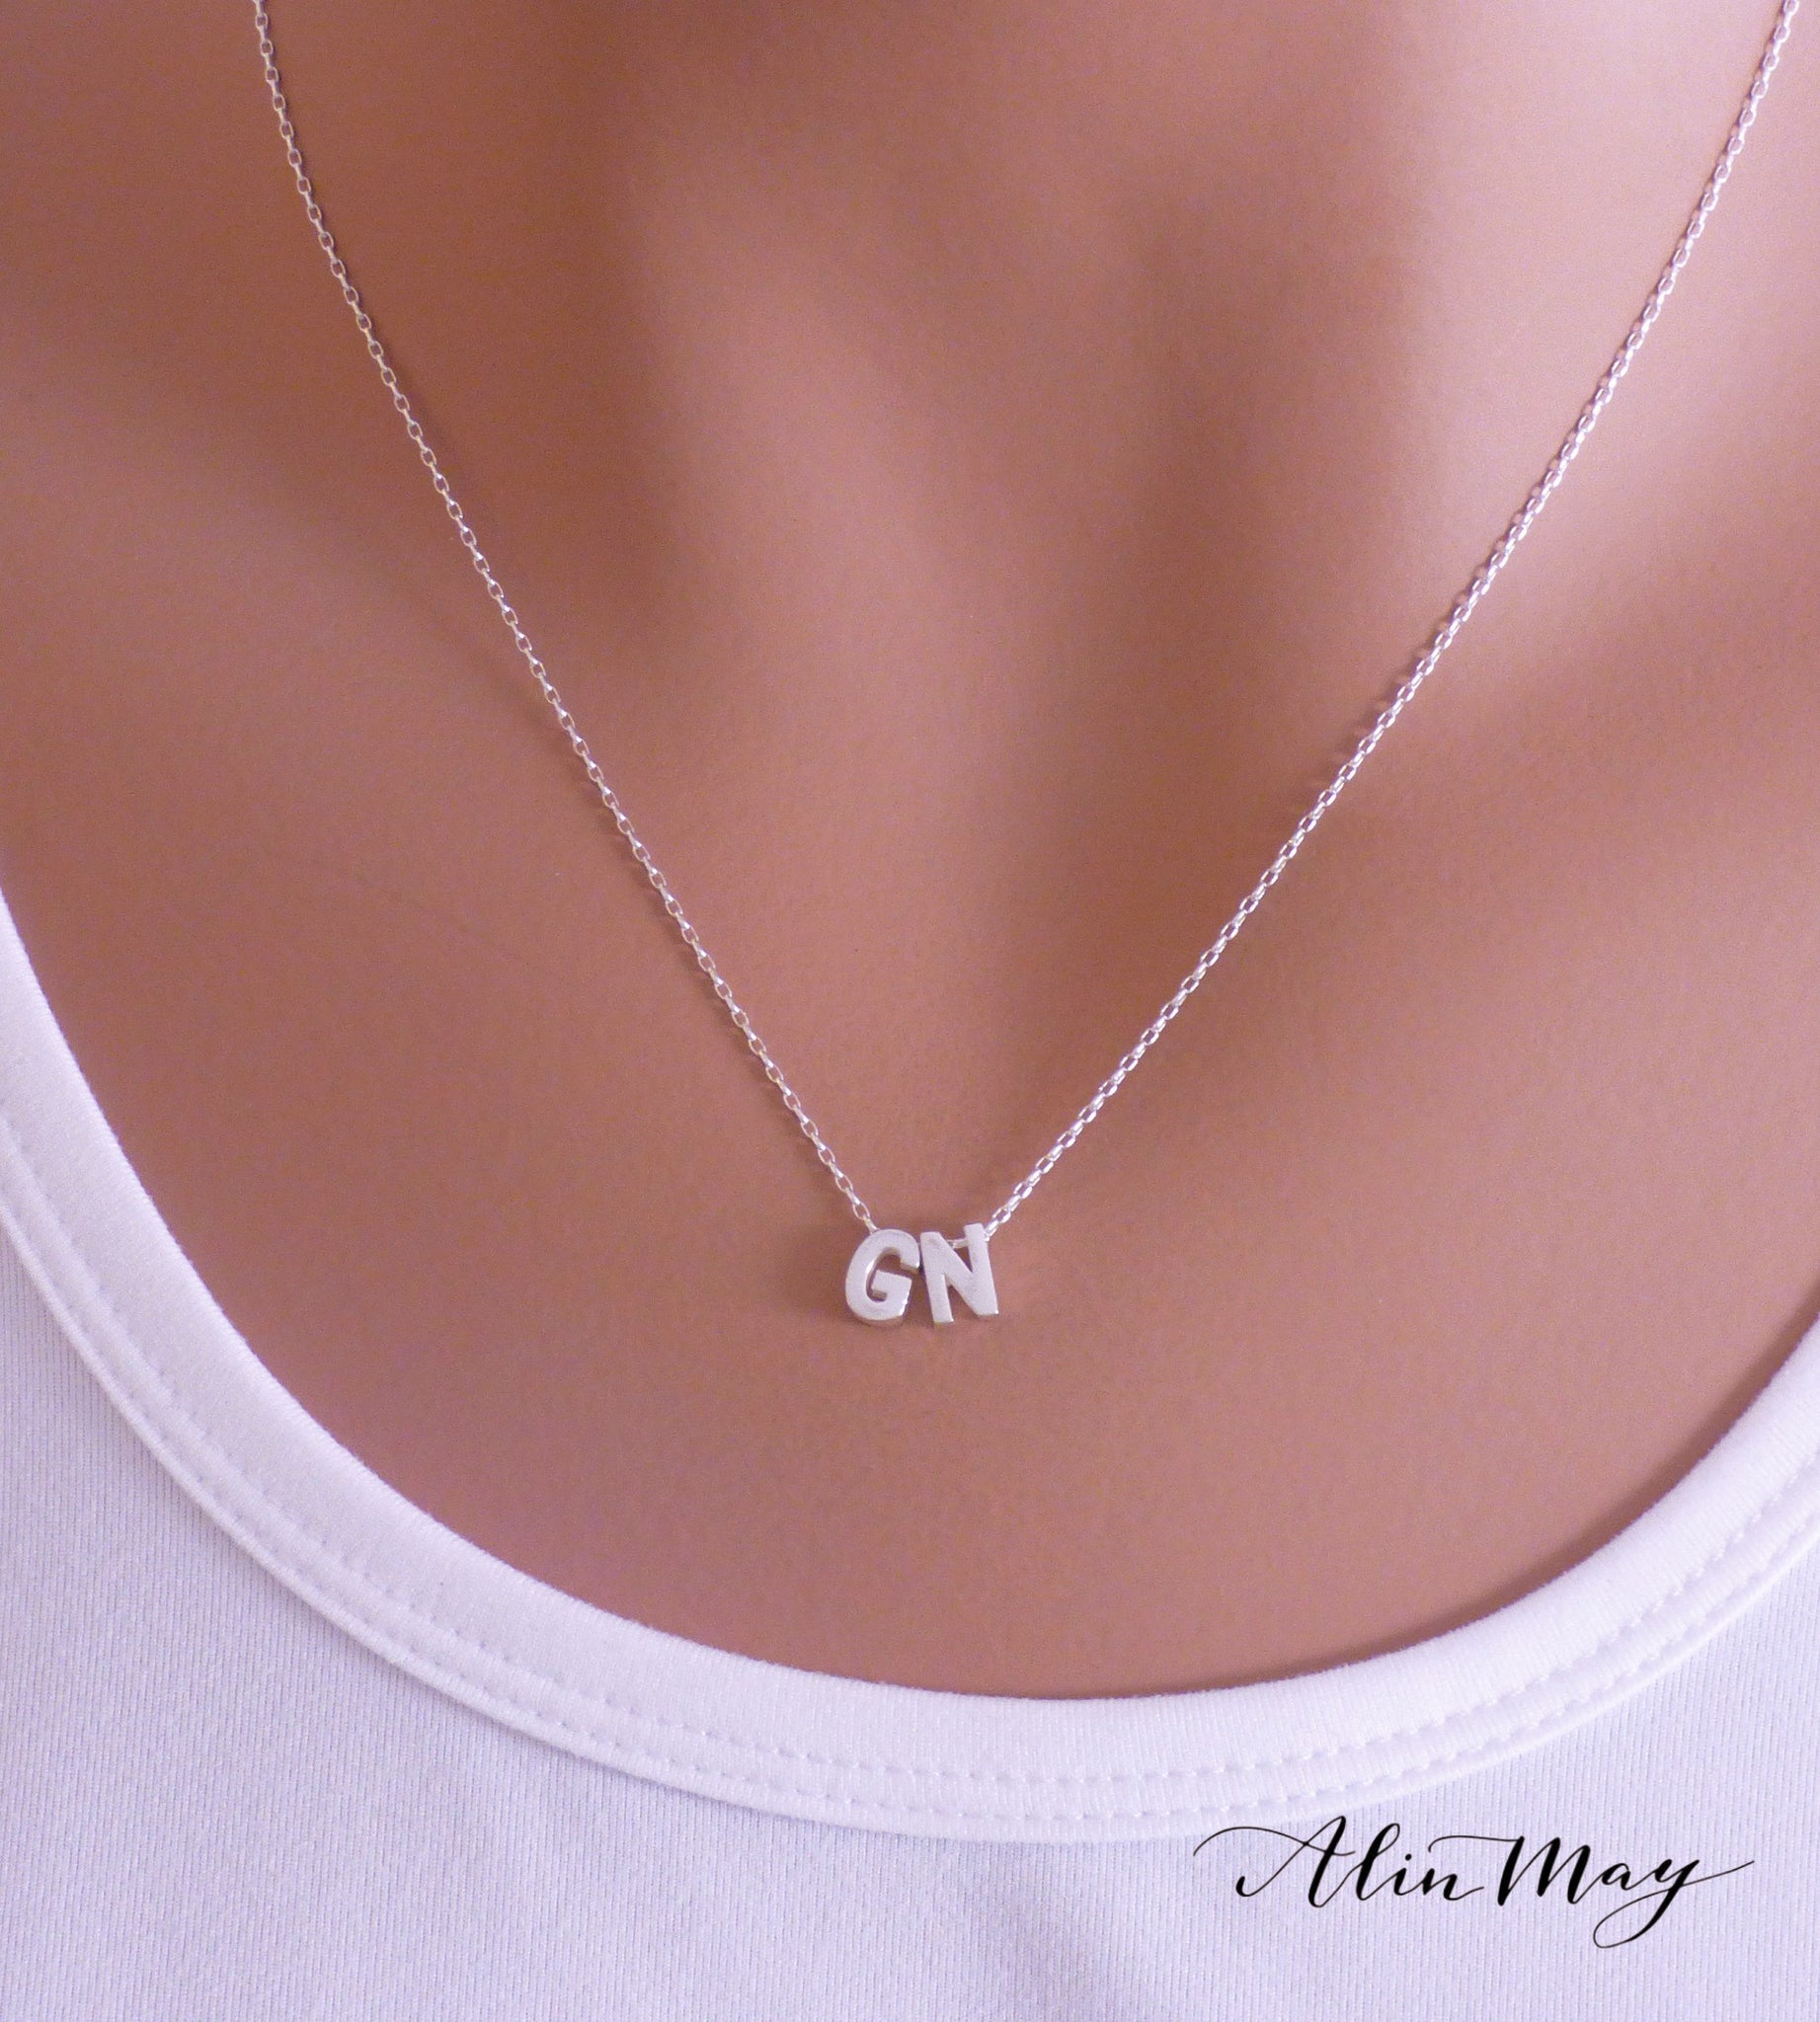 Two Initial Necklace Alinmay